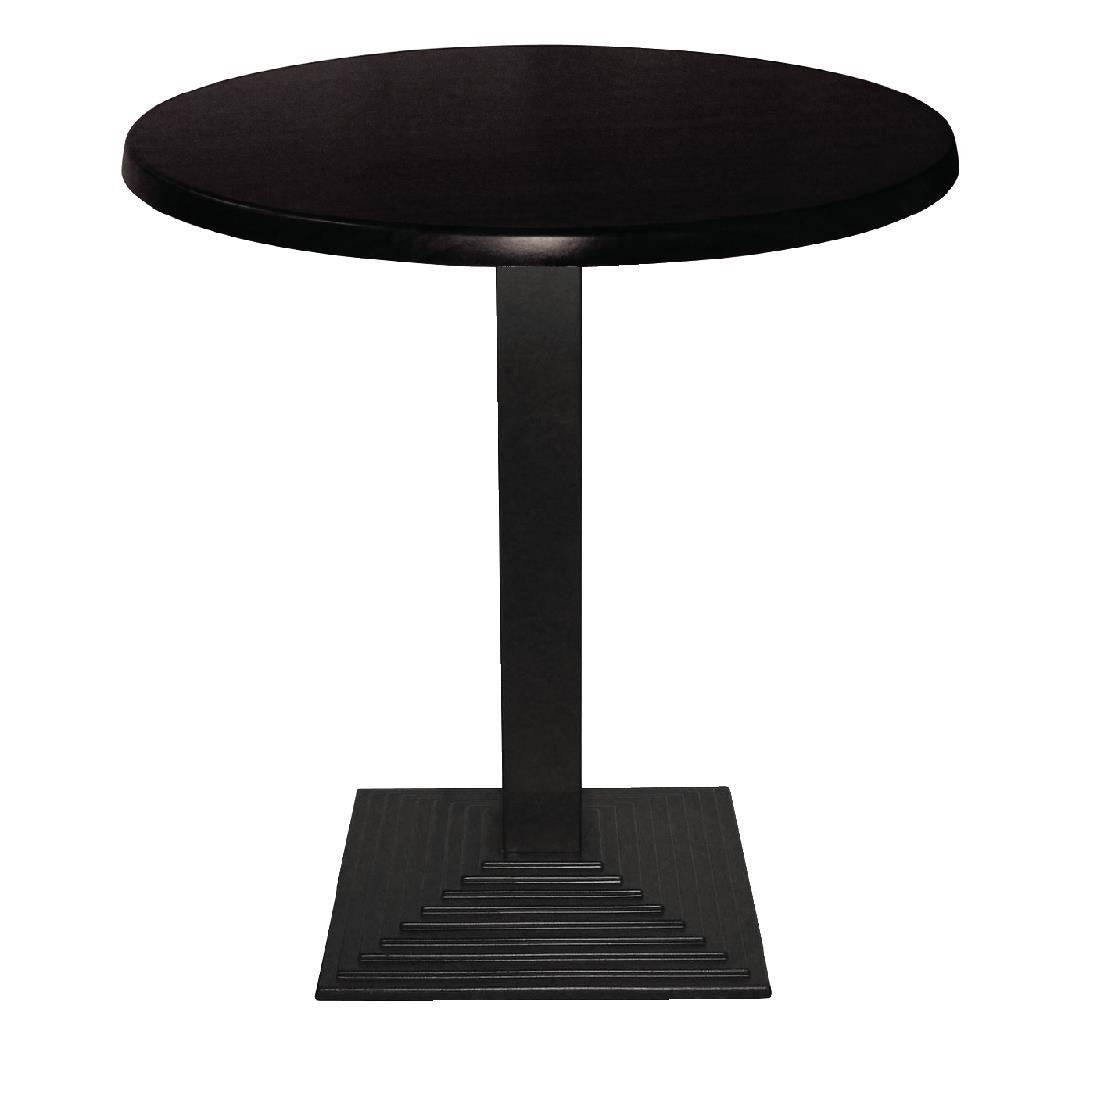 CC513 Werzalit Pre-drilled Round Table Top Black 800mm JD Catering Equipment Solutions Ltd